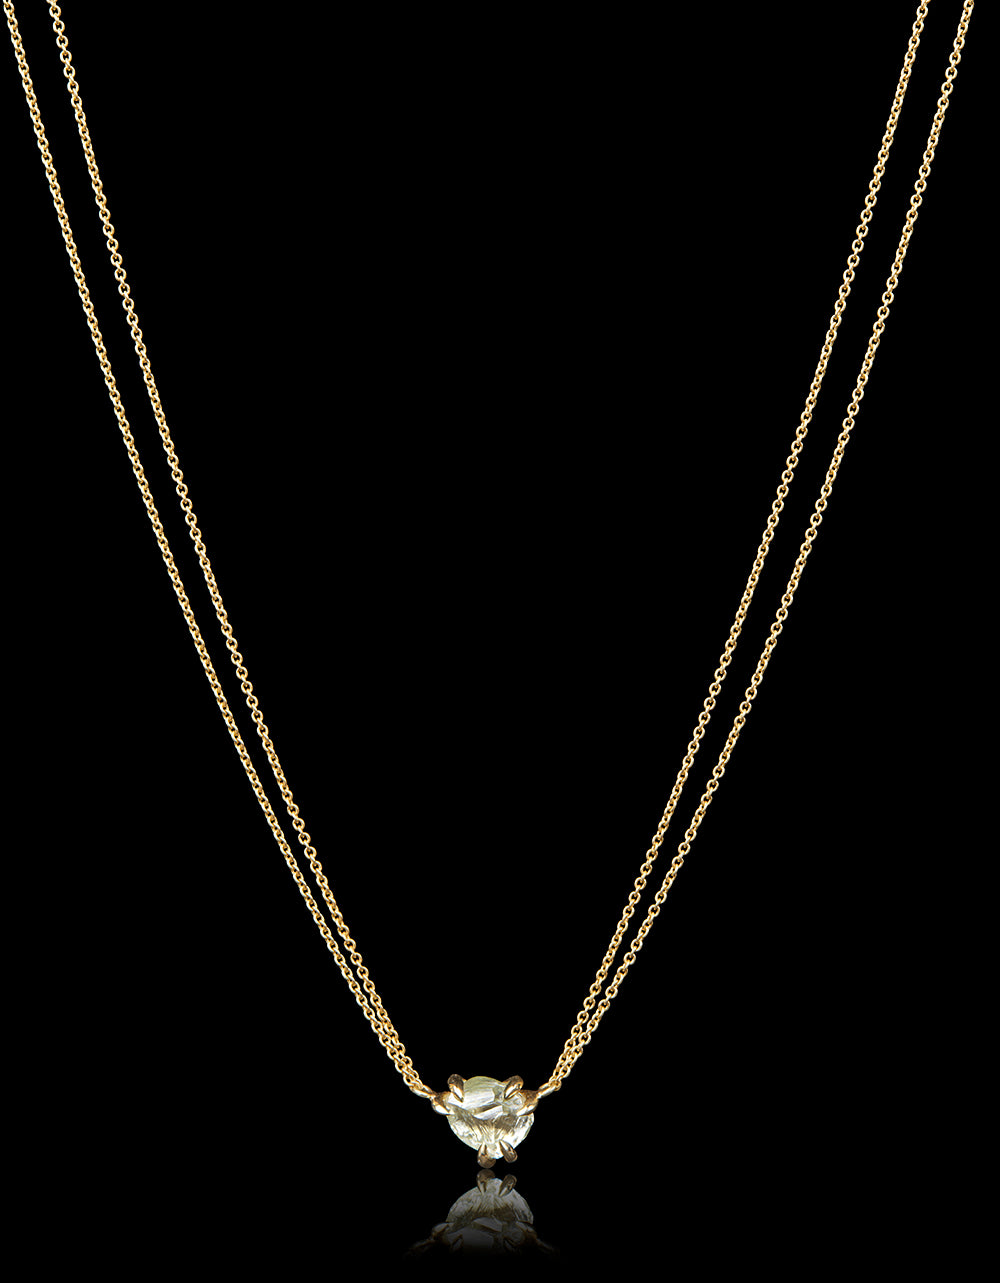 South African Beauty Necklace – 1.80 ct.